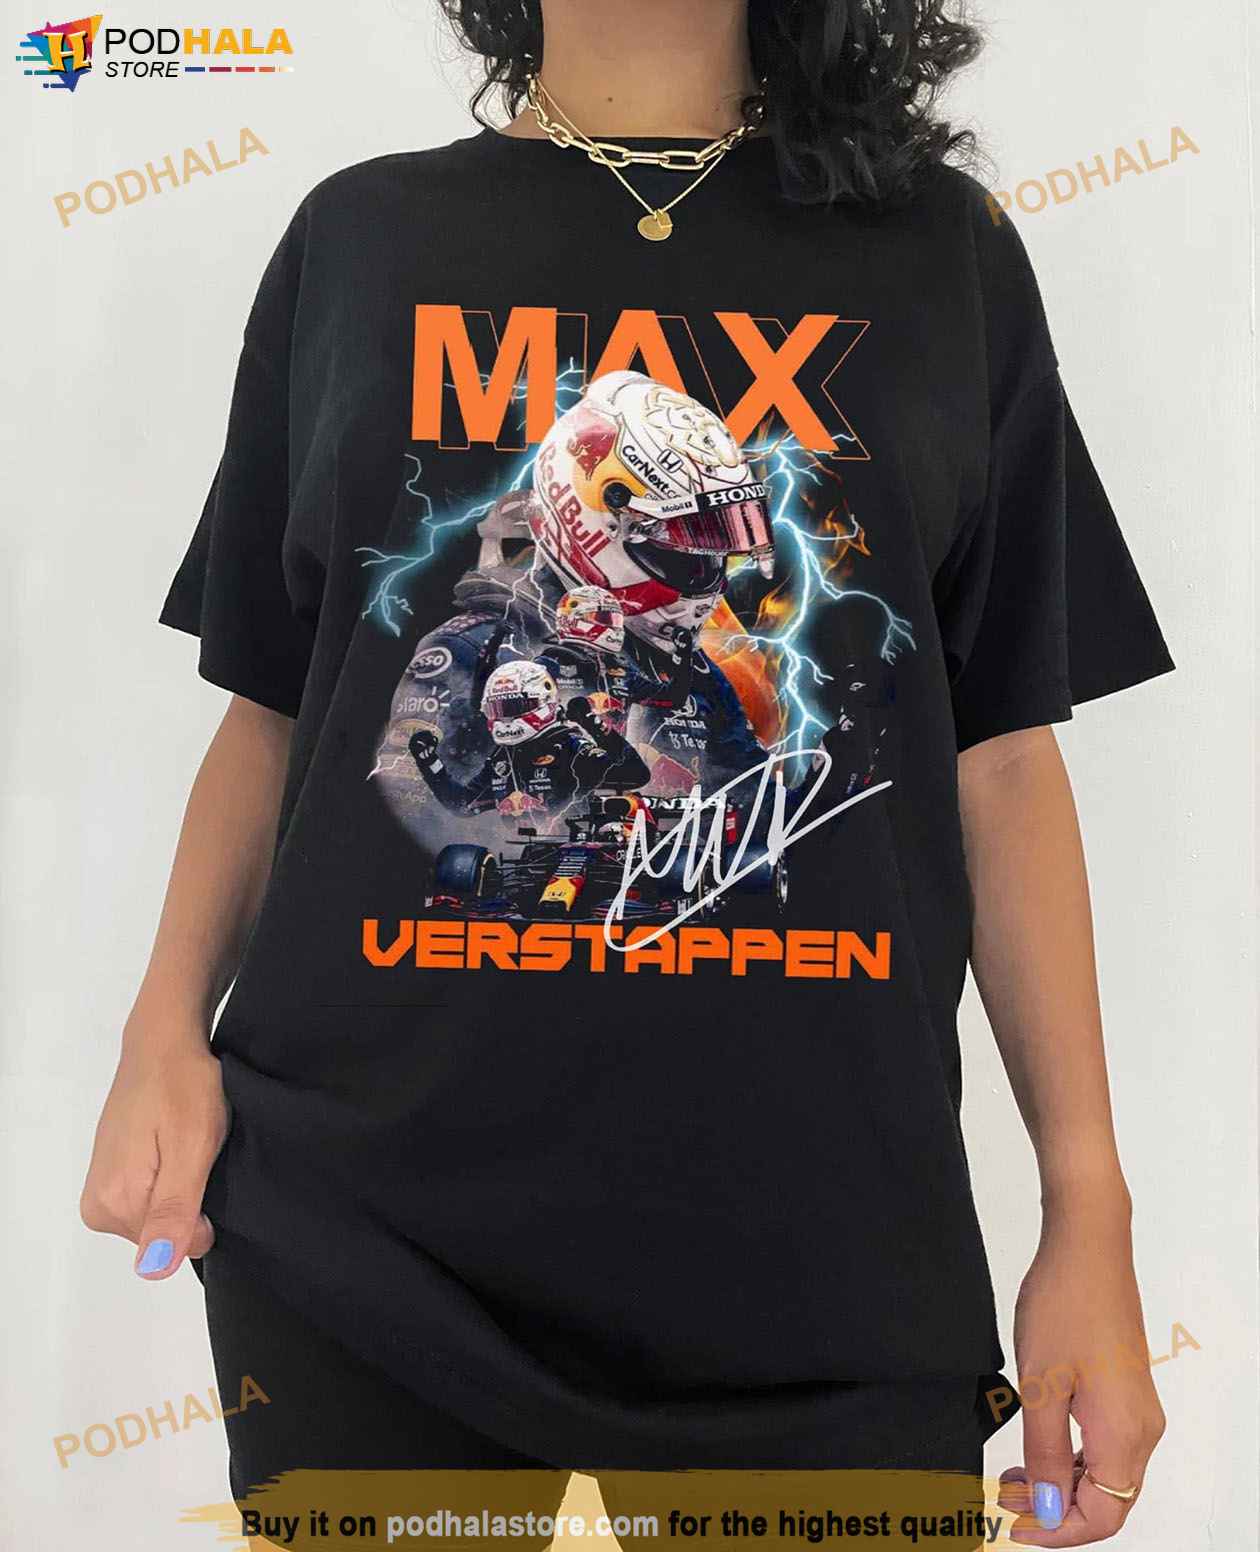 Max Verstappen Shirt, Champion Formula 1 Tee, Racing F1 Player Merch - Bring Your Ideas, Thoughts Imaginations Into